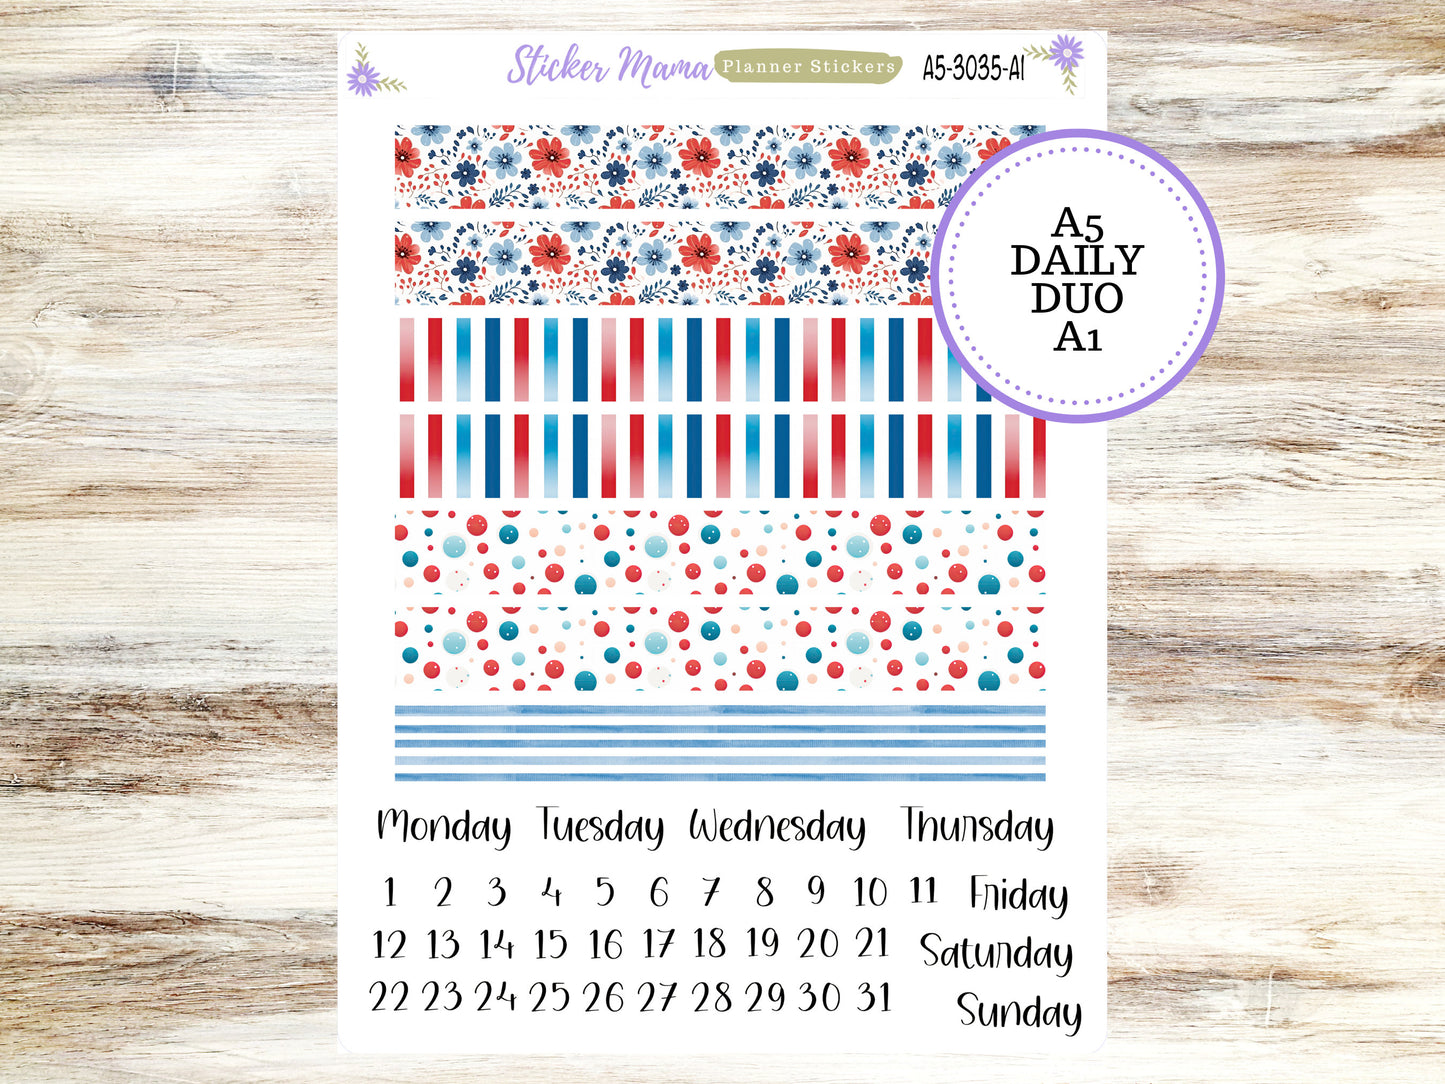 A5-DAILY DUO-Kit #3035  || American Dream Kit  || Planner Stickers - Daily Duo A5 Planner - Daily Duo Stickers - Daily Planner